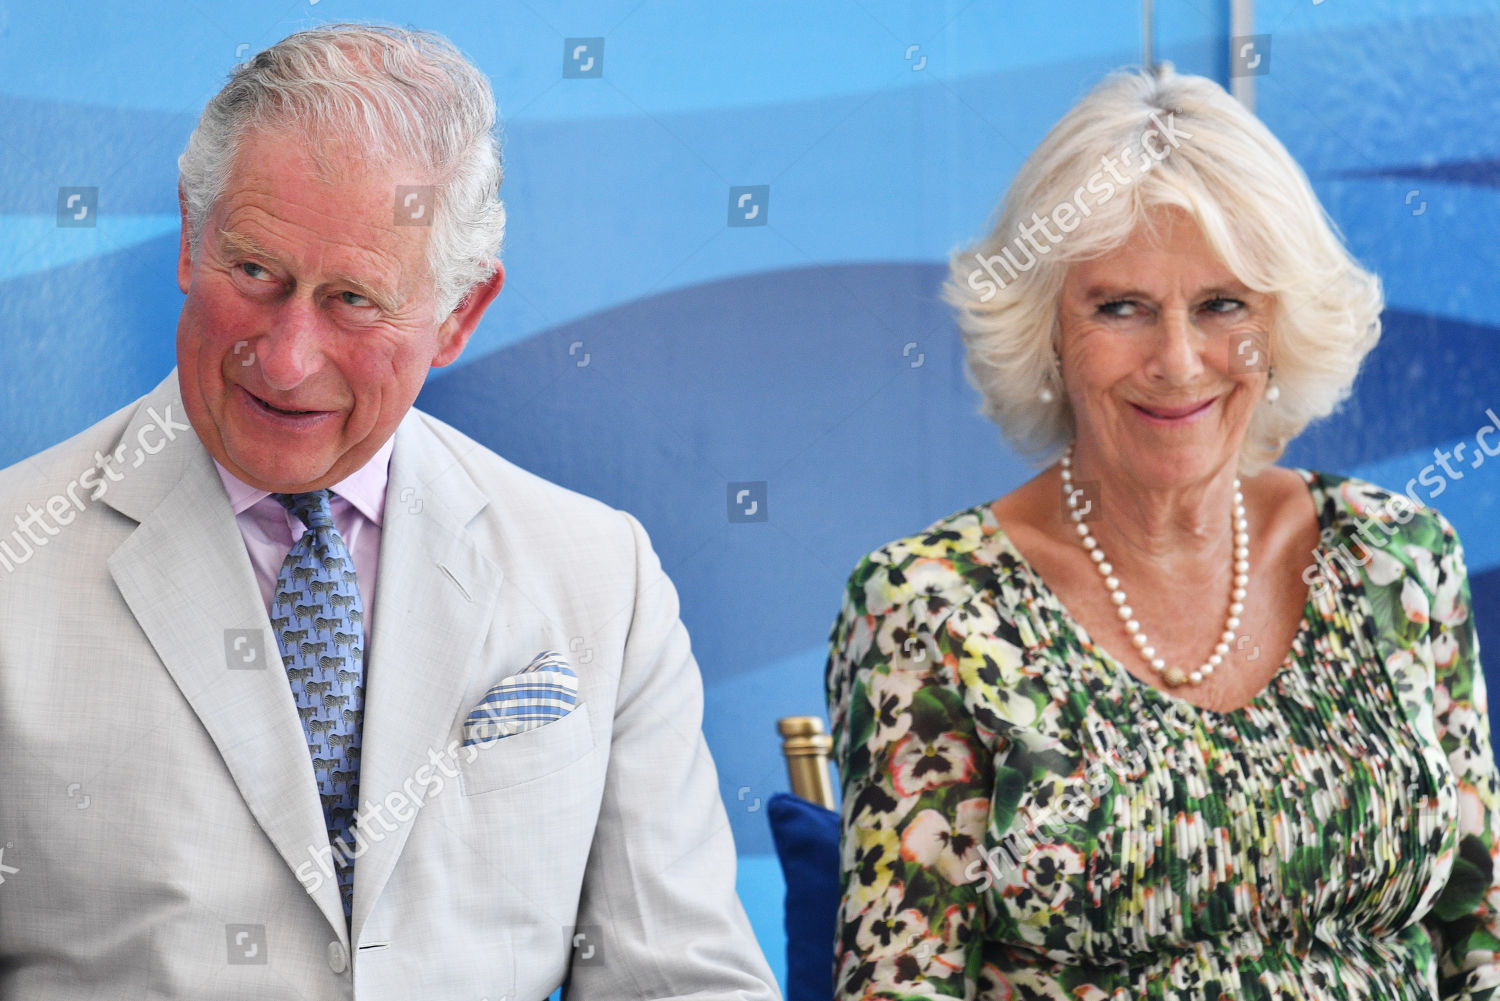 prince-charles-and-camilla-duchess-of-cornwall-caribbean-tour-cayman-islands-shutterstock-editorial-10180229x.jpg